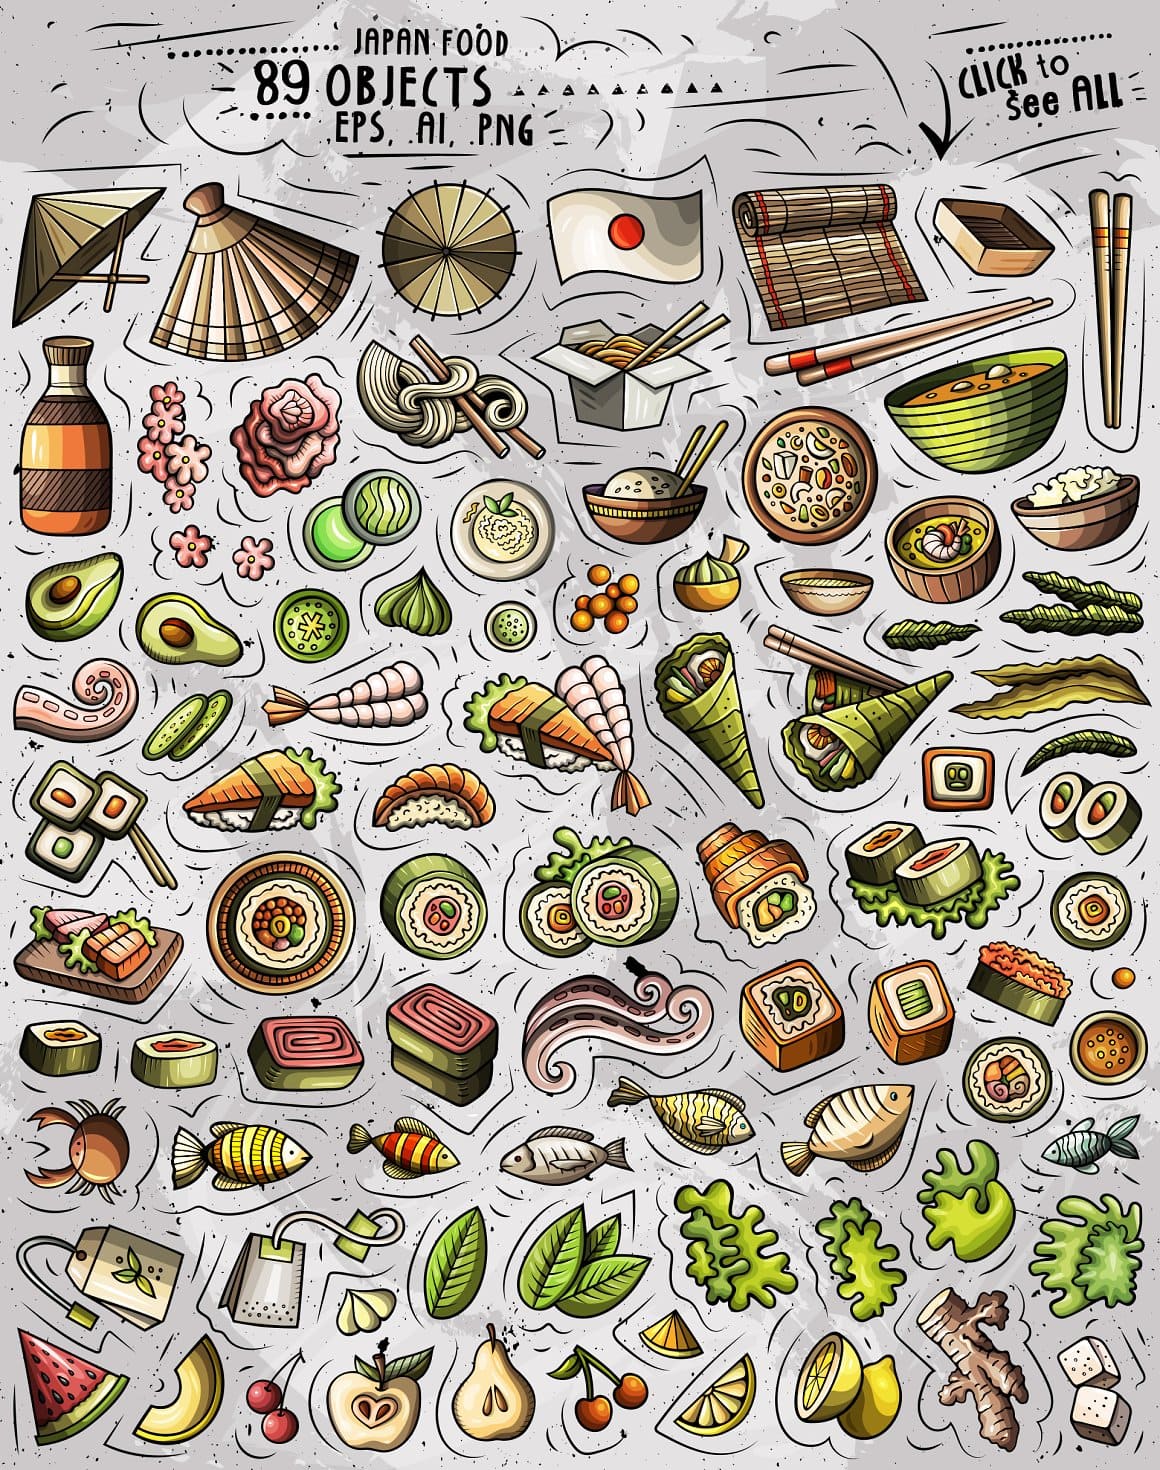 Japan Food Cartoon Objects Set Preview 2.